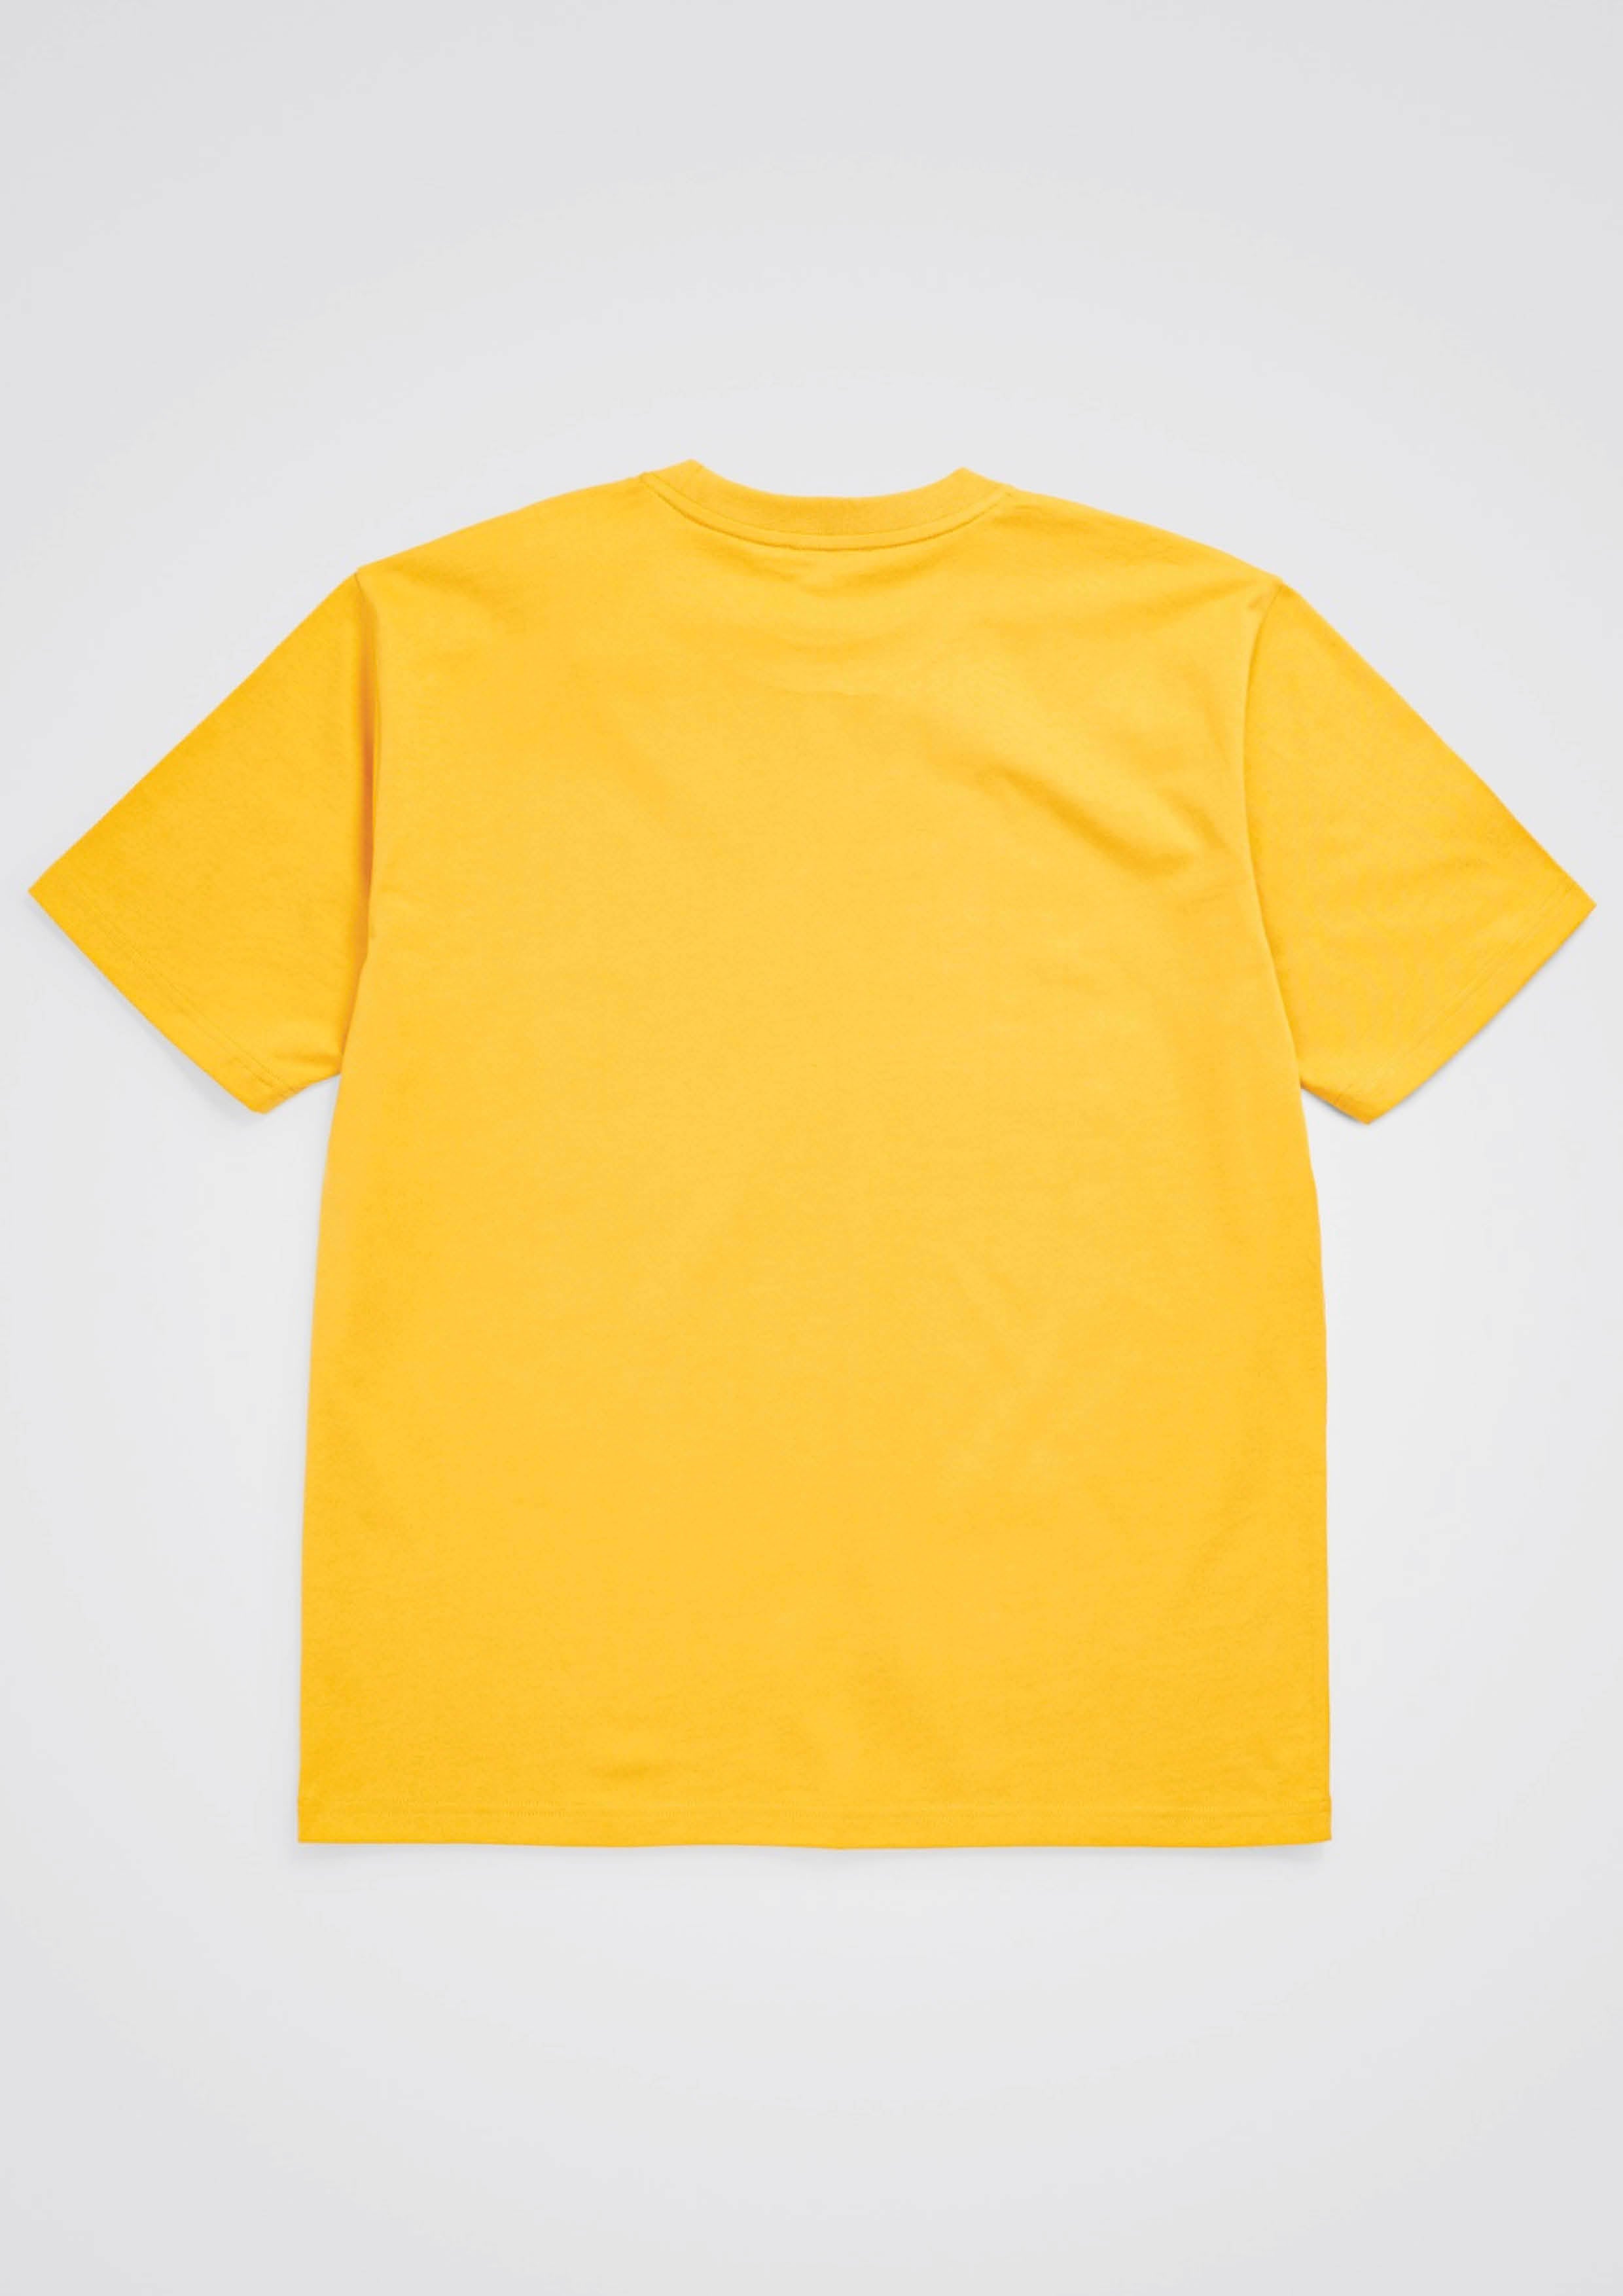 NORSE PROJECTS - JOHANNES STANDARD LOGO INDUSTRIAL YELLOW – SOLAR MTP